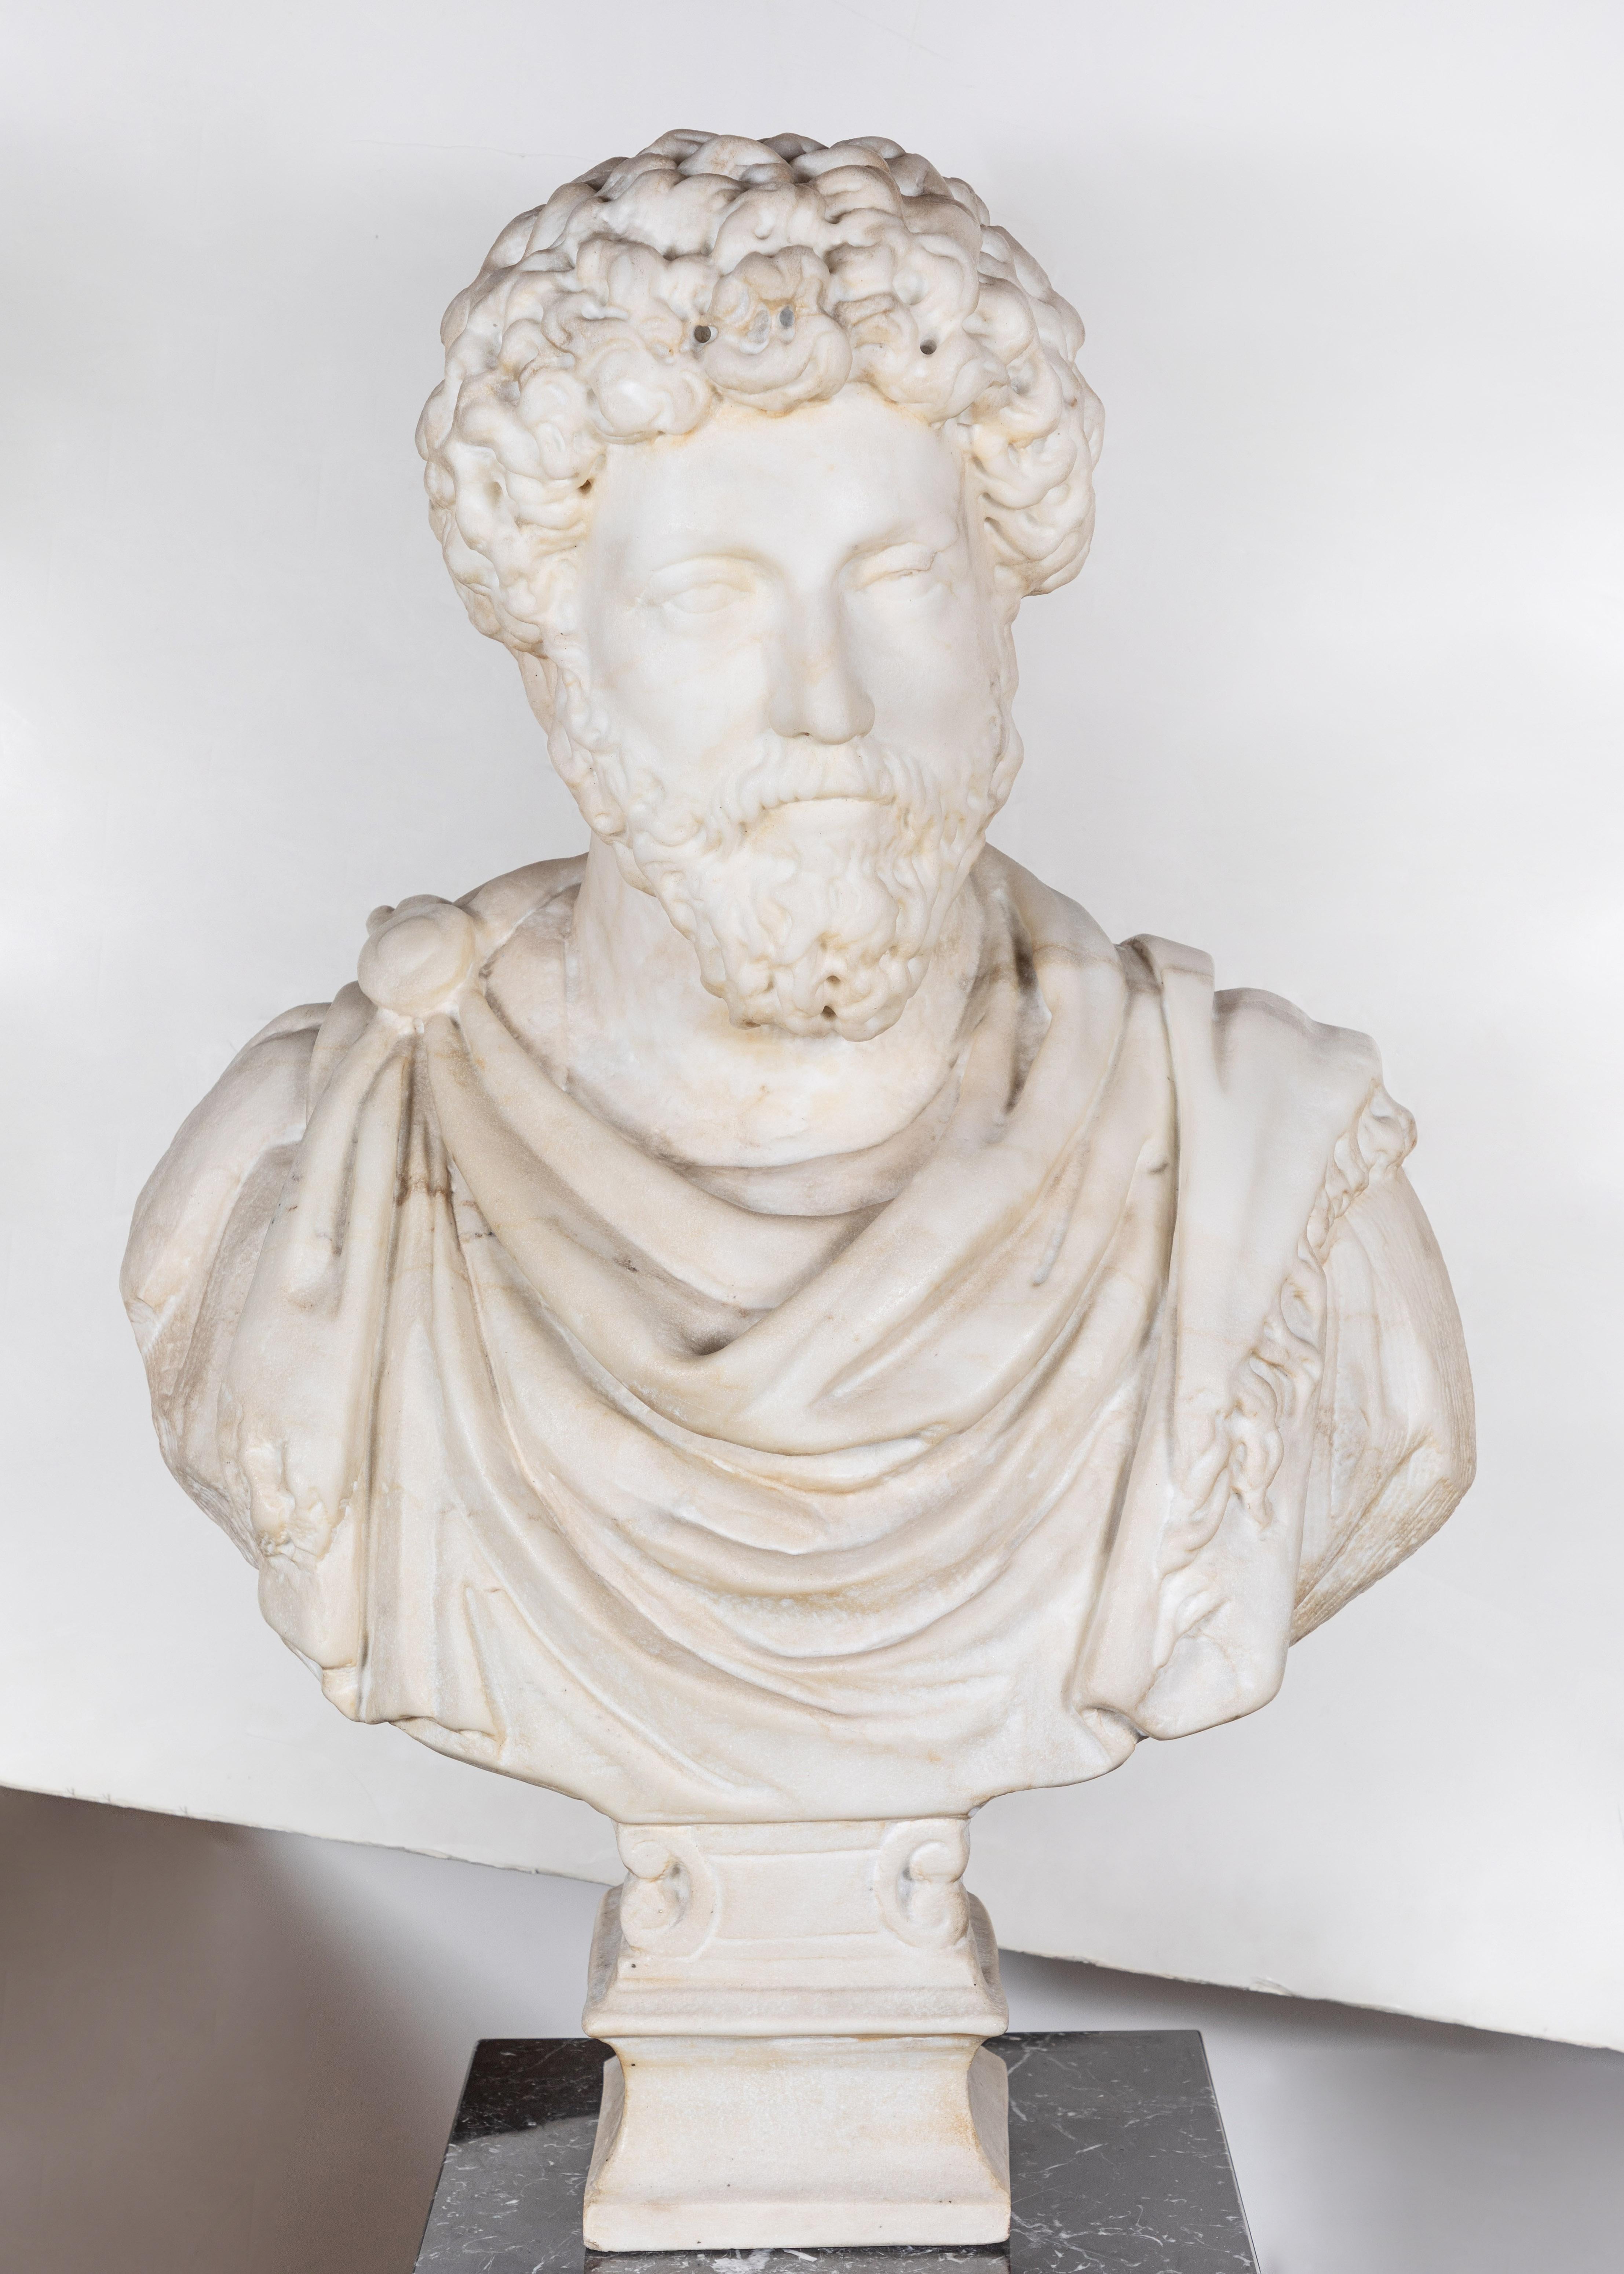 Larger than life, beautifully carved, Carrara marble bust of a noble figure in clasped robes- perhaps the Emperor Hadrian (24 January 76 CE–10 July 138 CE), known as one of the 